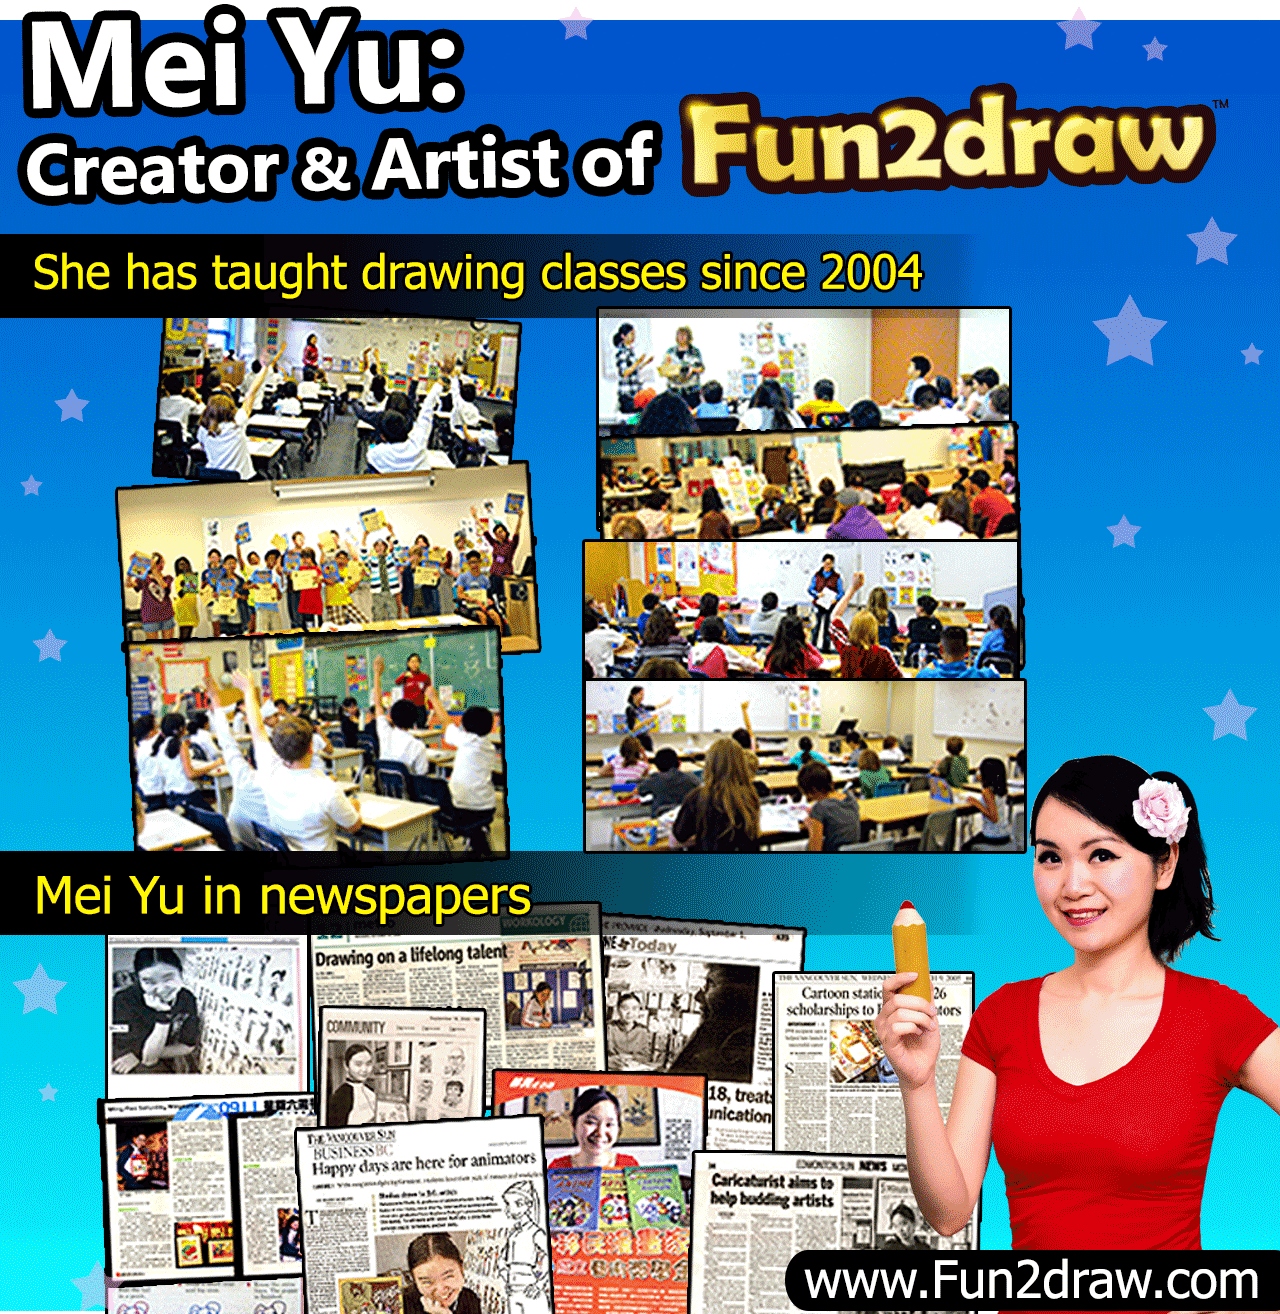 Mei Yu, featured in a number of art lesson classes and newspaper articles.